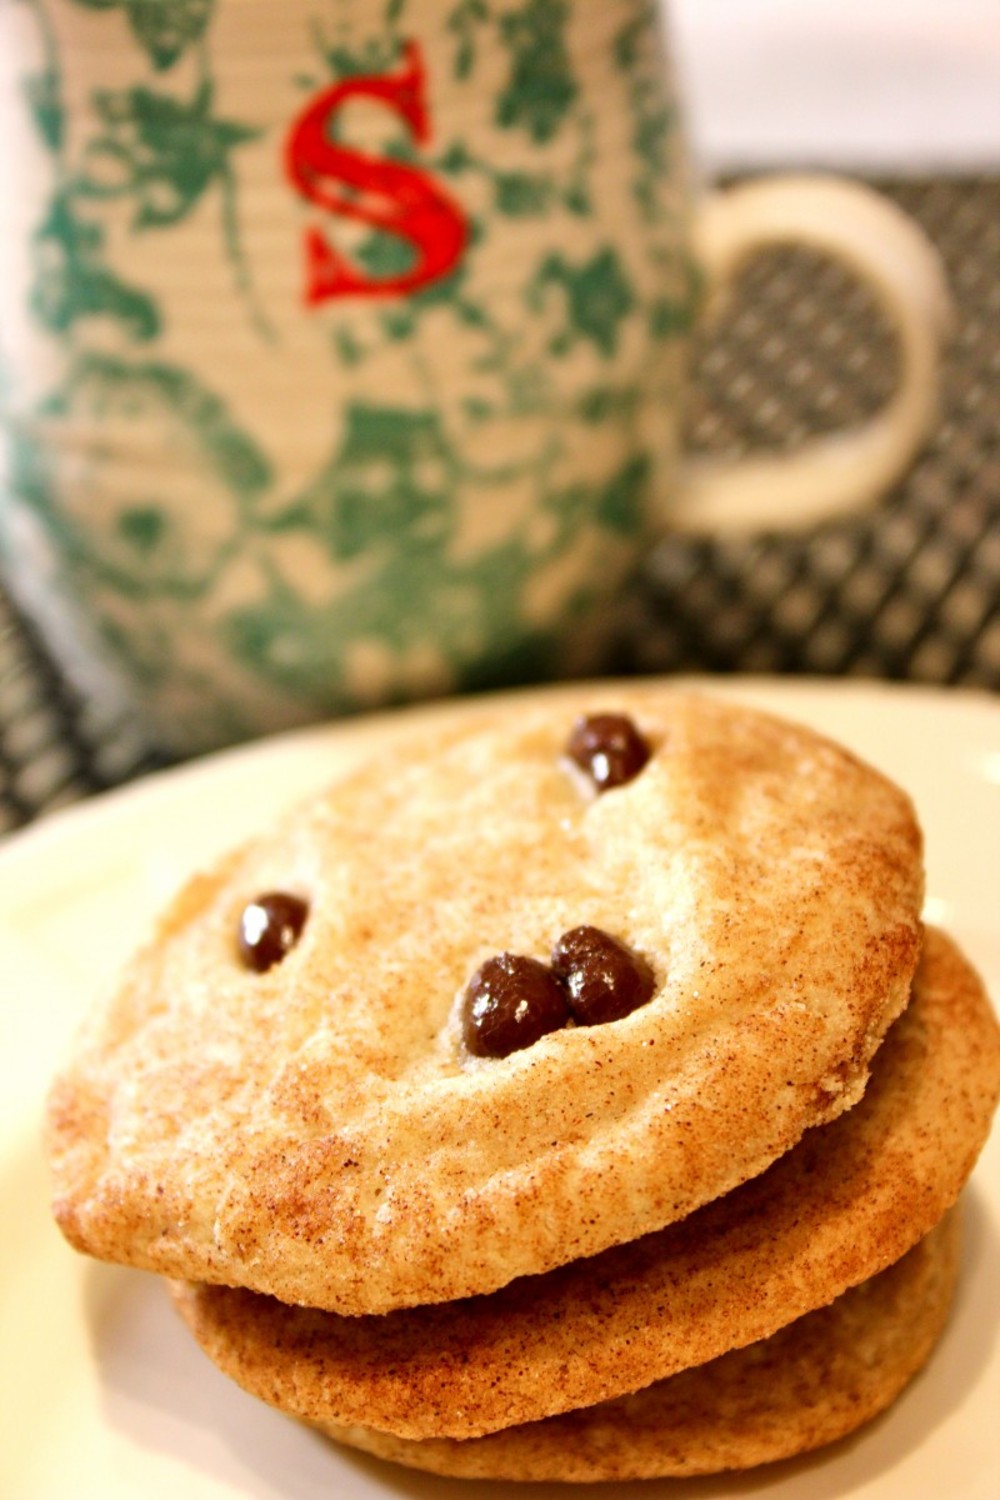 Add some Dark Chocolate Pomegranate Seeds on top of your snickerdoodle for some extra Kick!